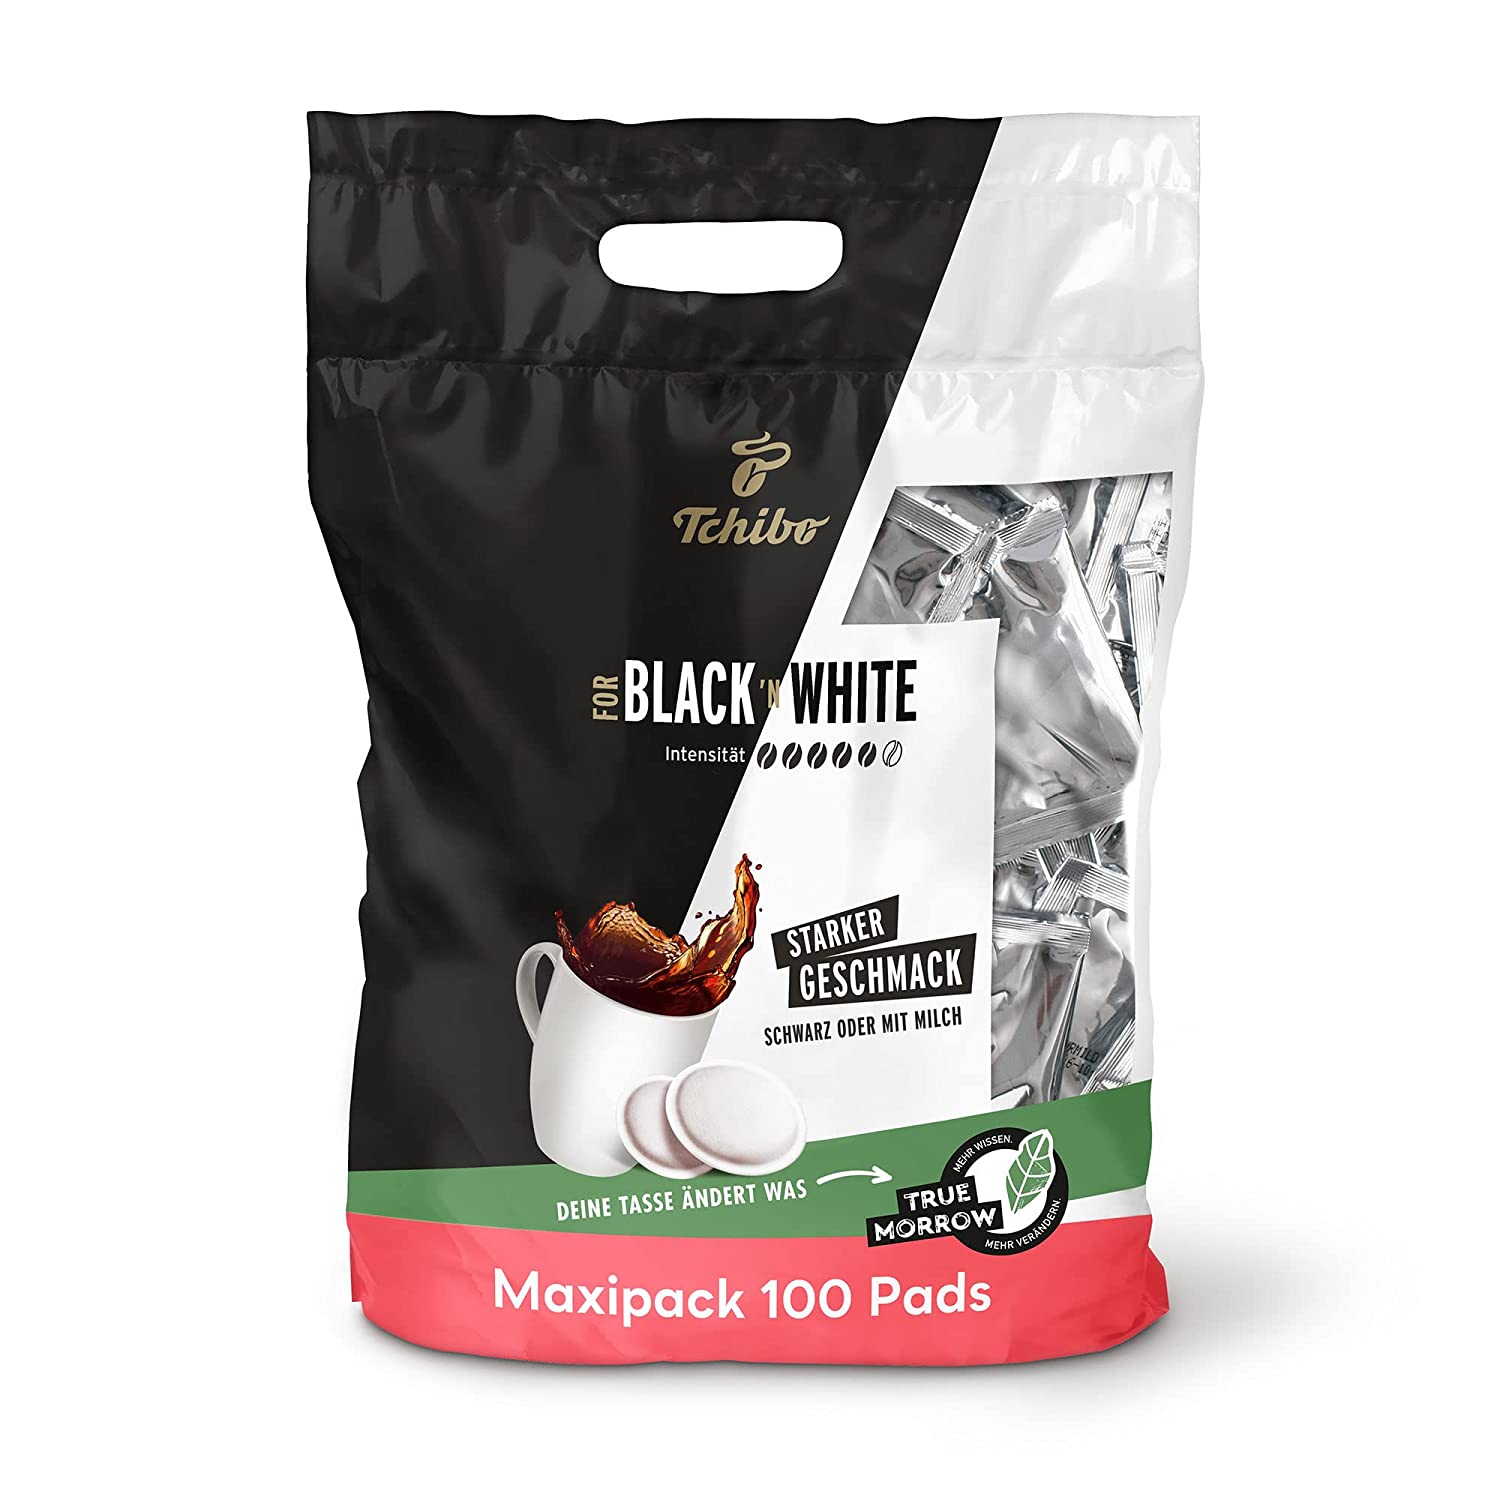 Tchibo Maxipack BLACK & WHITE, 100 pieces – 1x 100 pads (coffee, strong with strong taste), sustainable, suitable for Senseo machines